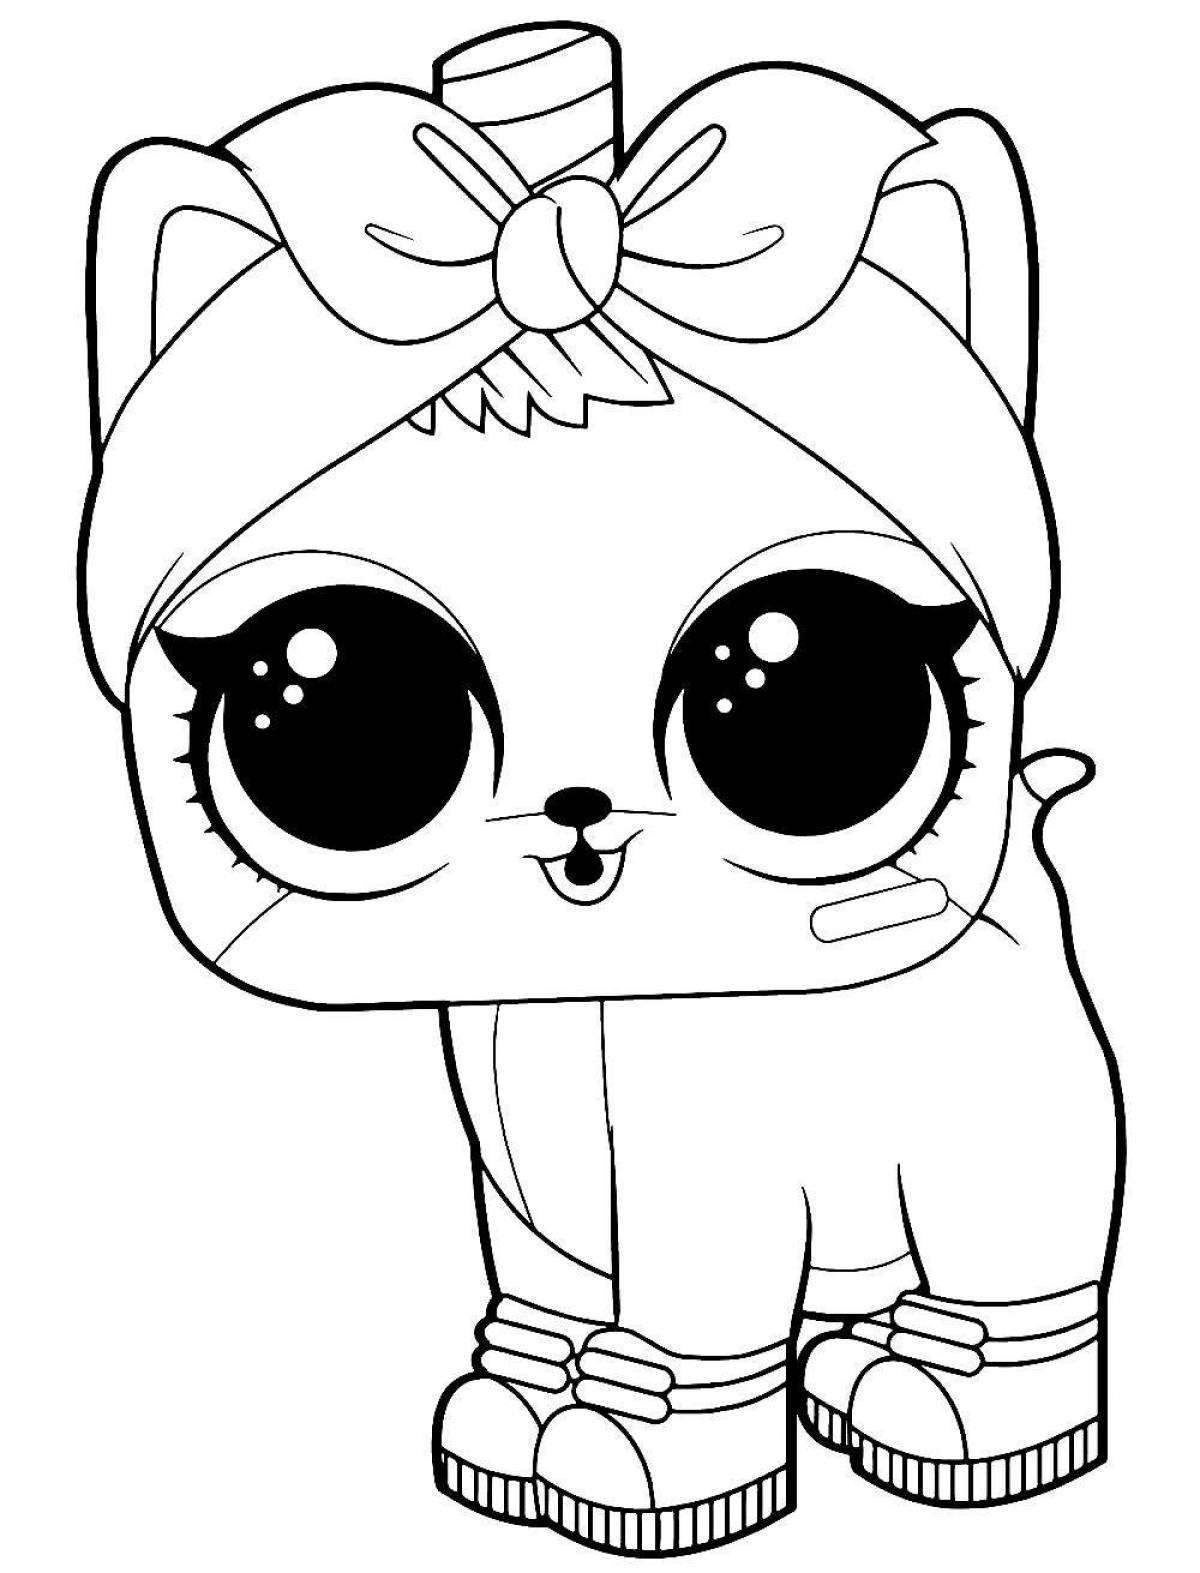 Colorful lol pets doll coloring pages